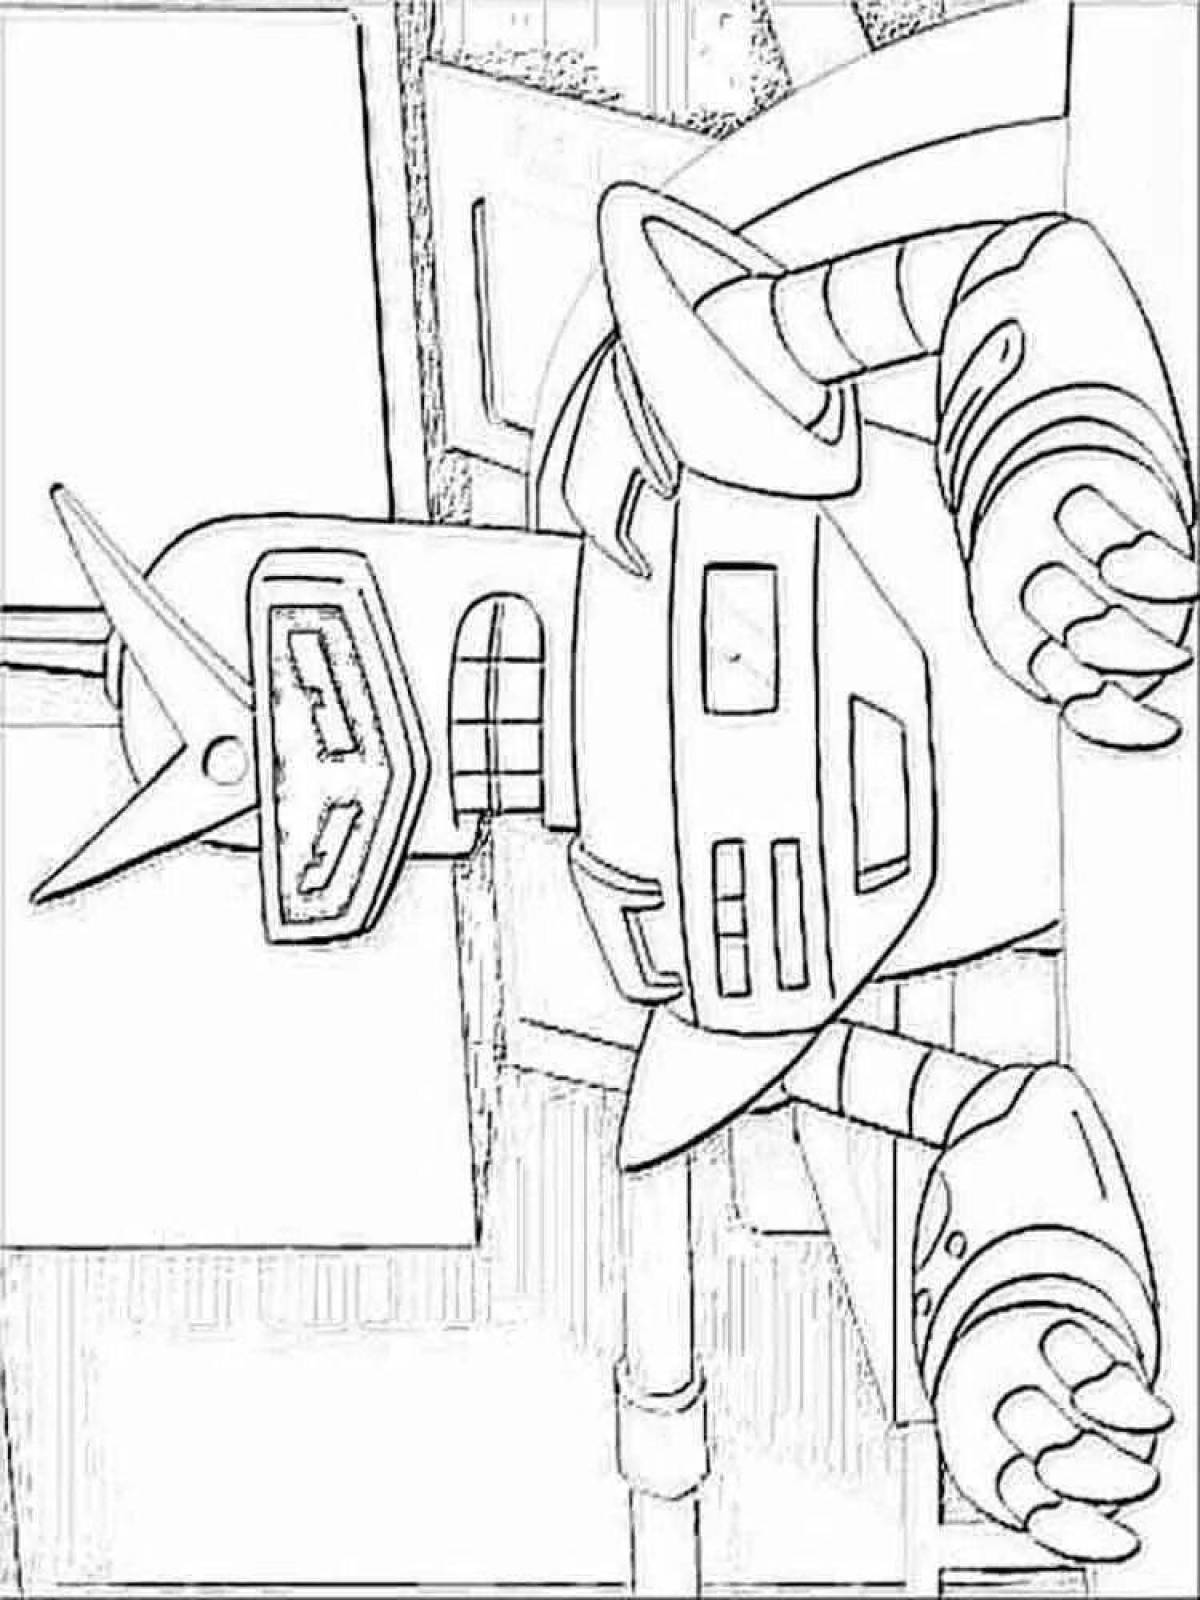 Great galaxy robot detective coloring book